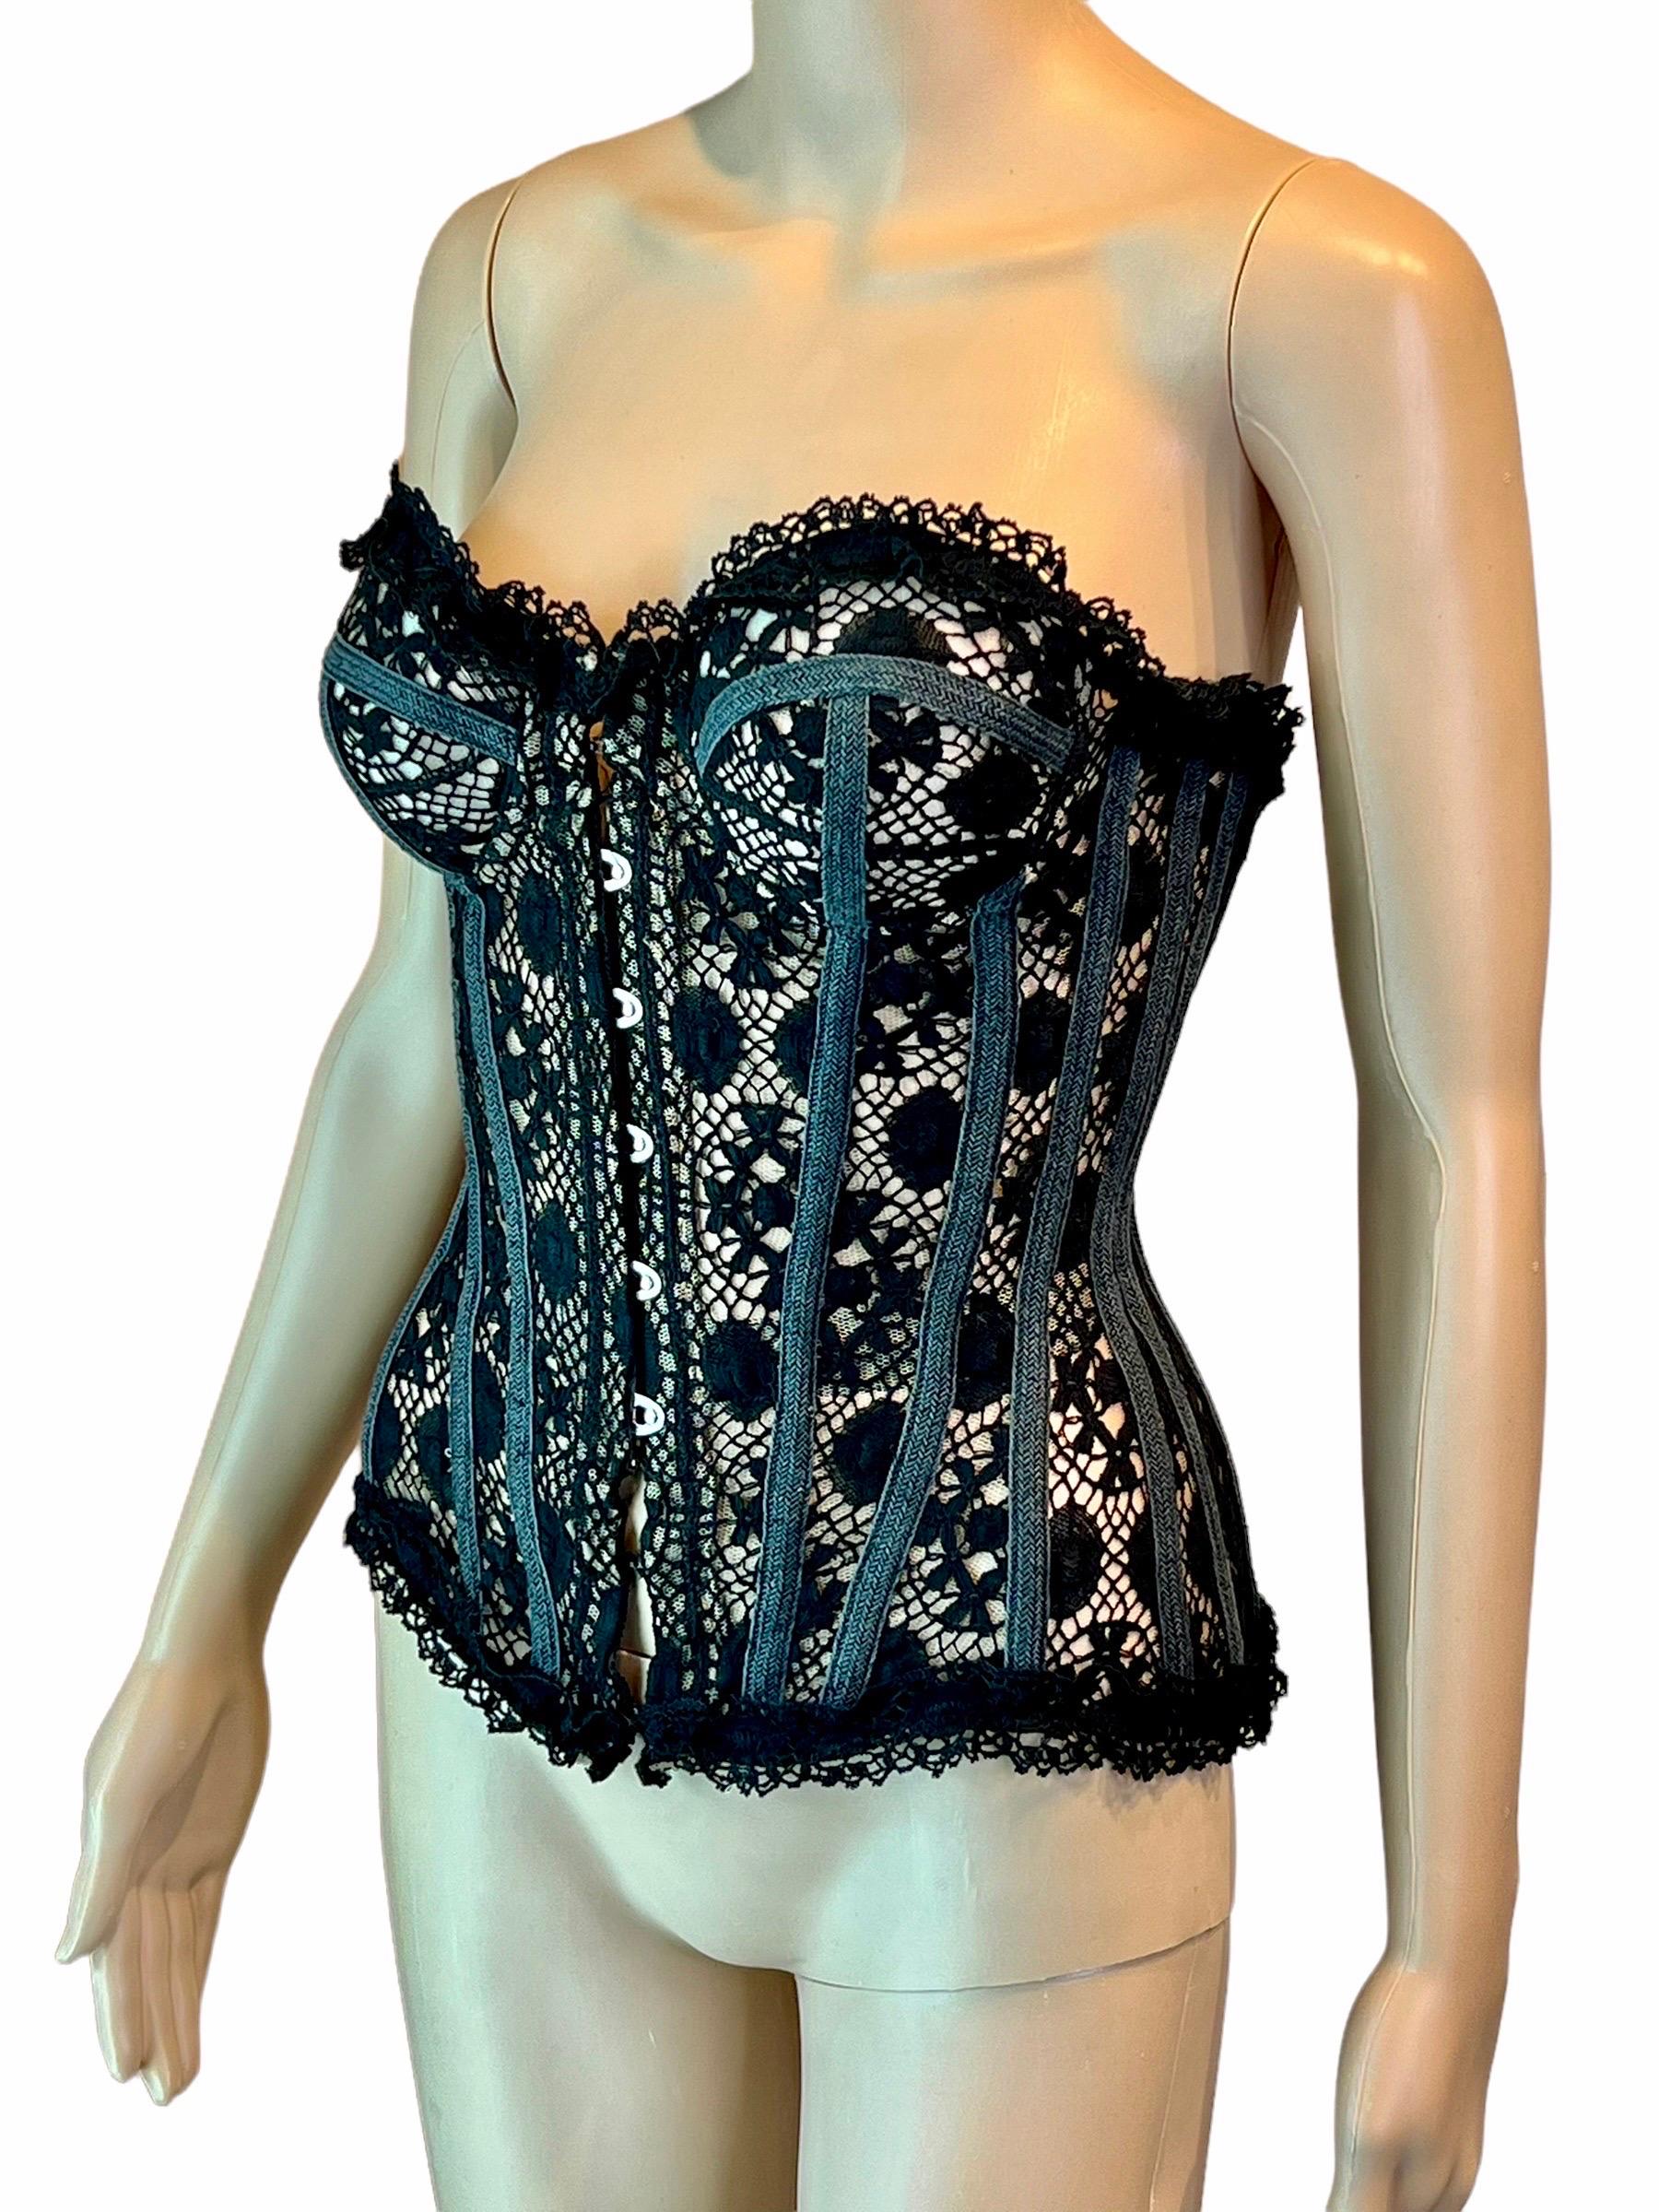 Jean Paul Gaultier S/S 2006 Runway Sheer Black Bustier Corset Lace Up Top IT 42

Look 46 from the Spring 2006 Collection.